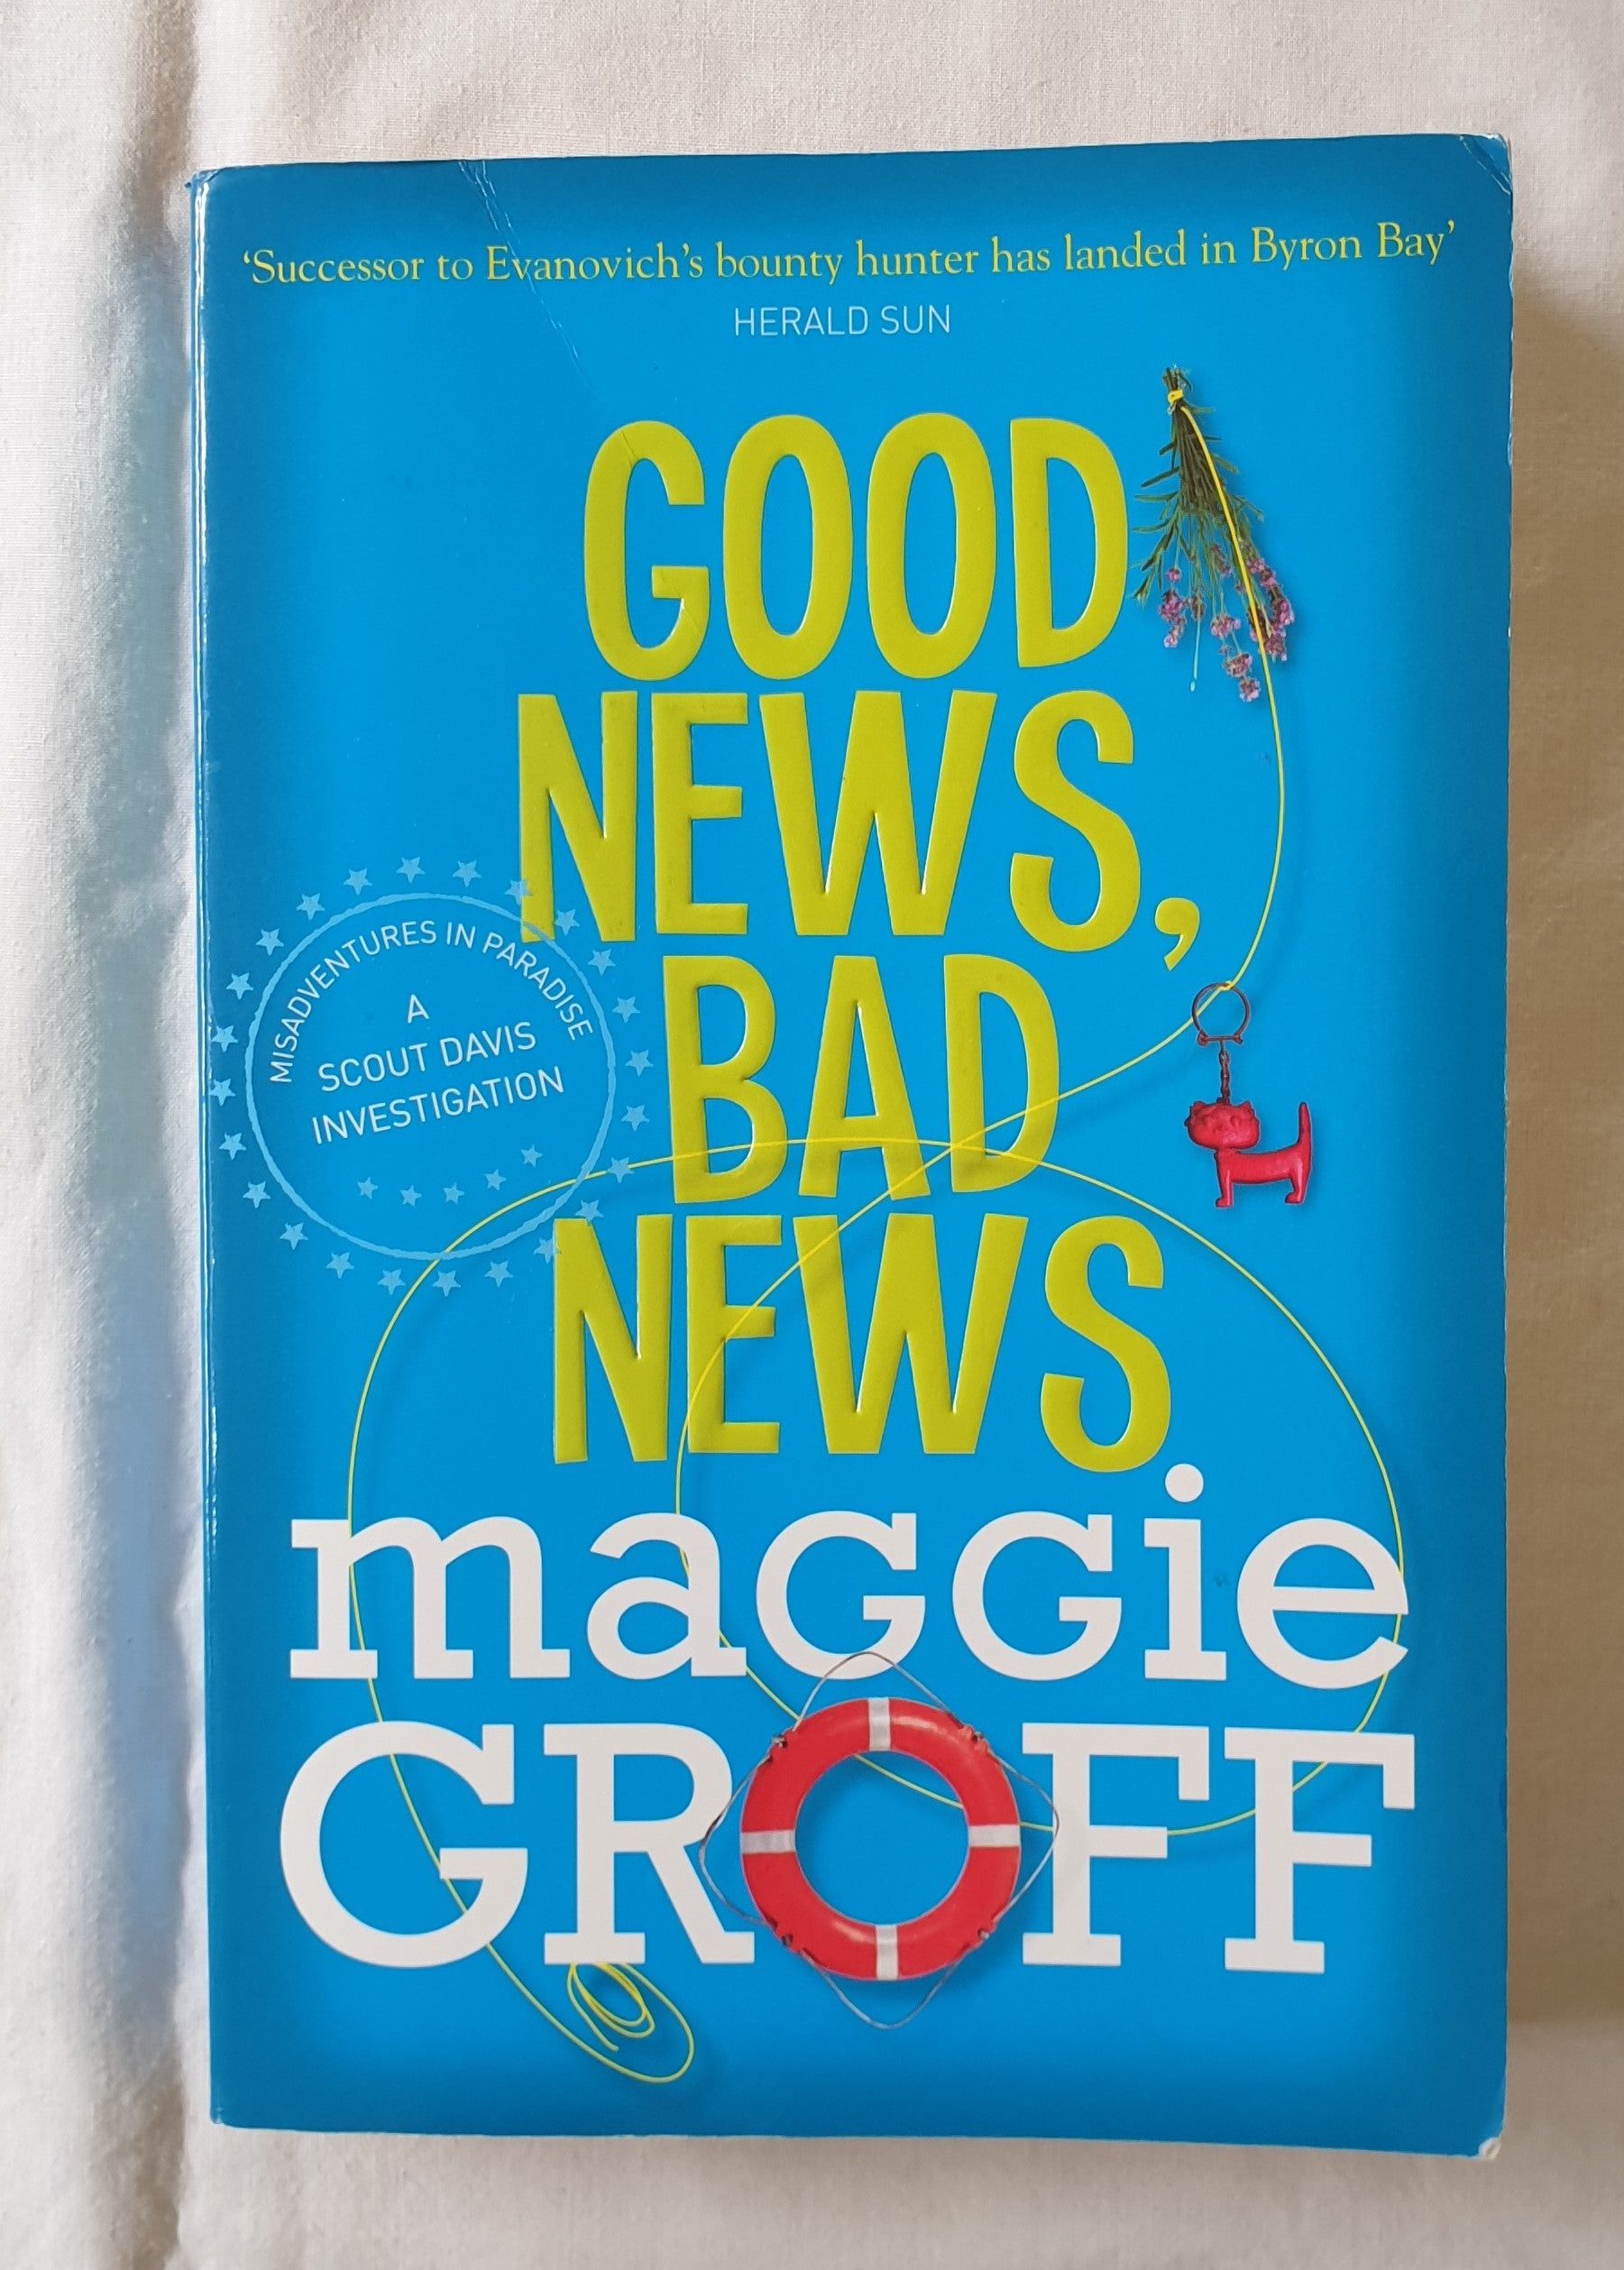 Good News, Bad News by Maggie Groff